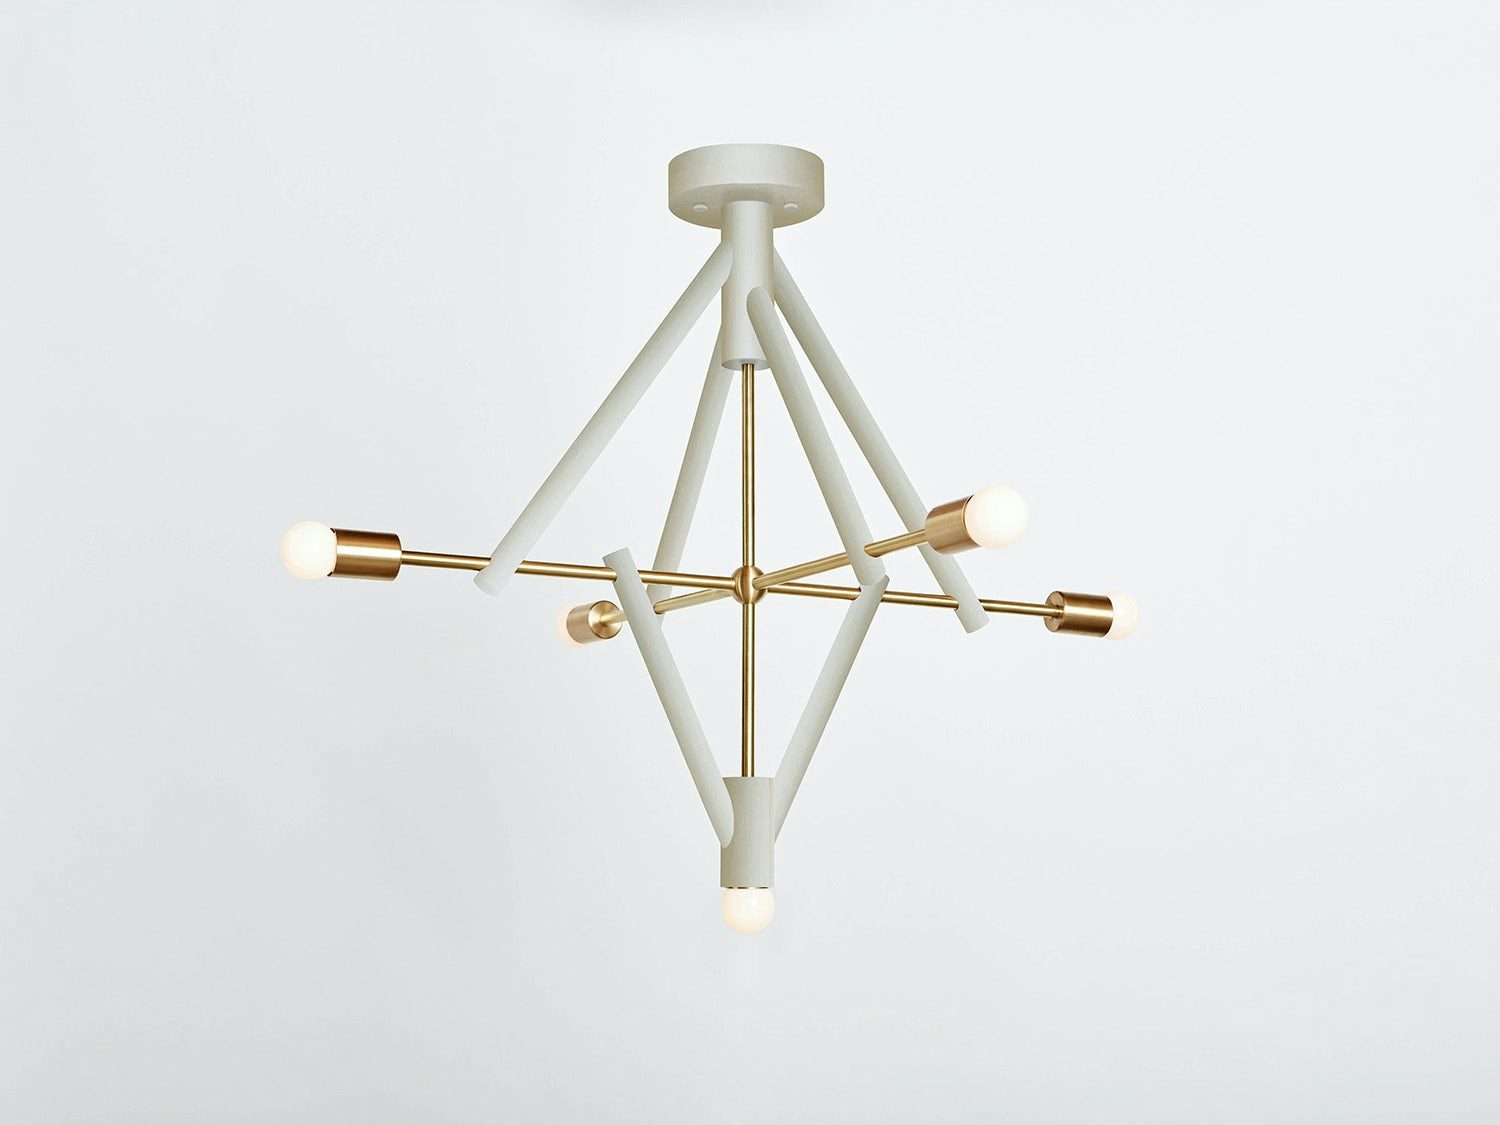 gallery image for Lodge Chandelier Five_Painted_On_White-Hewn Brass